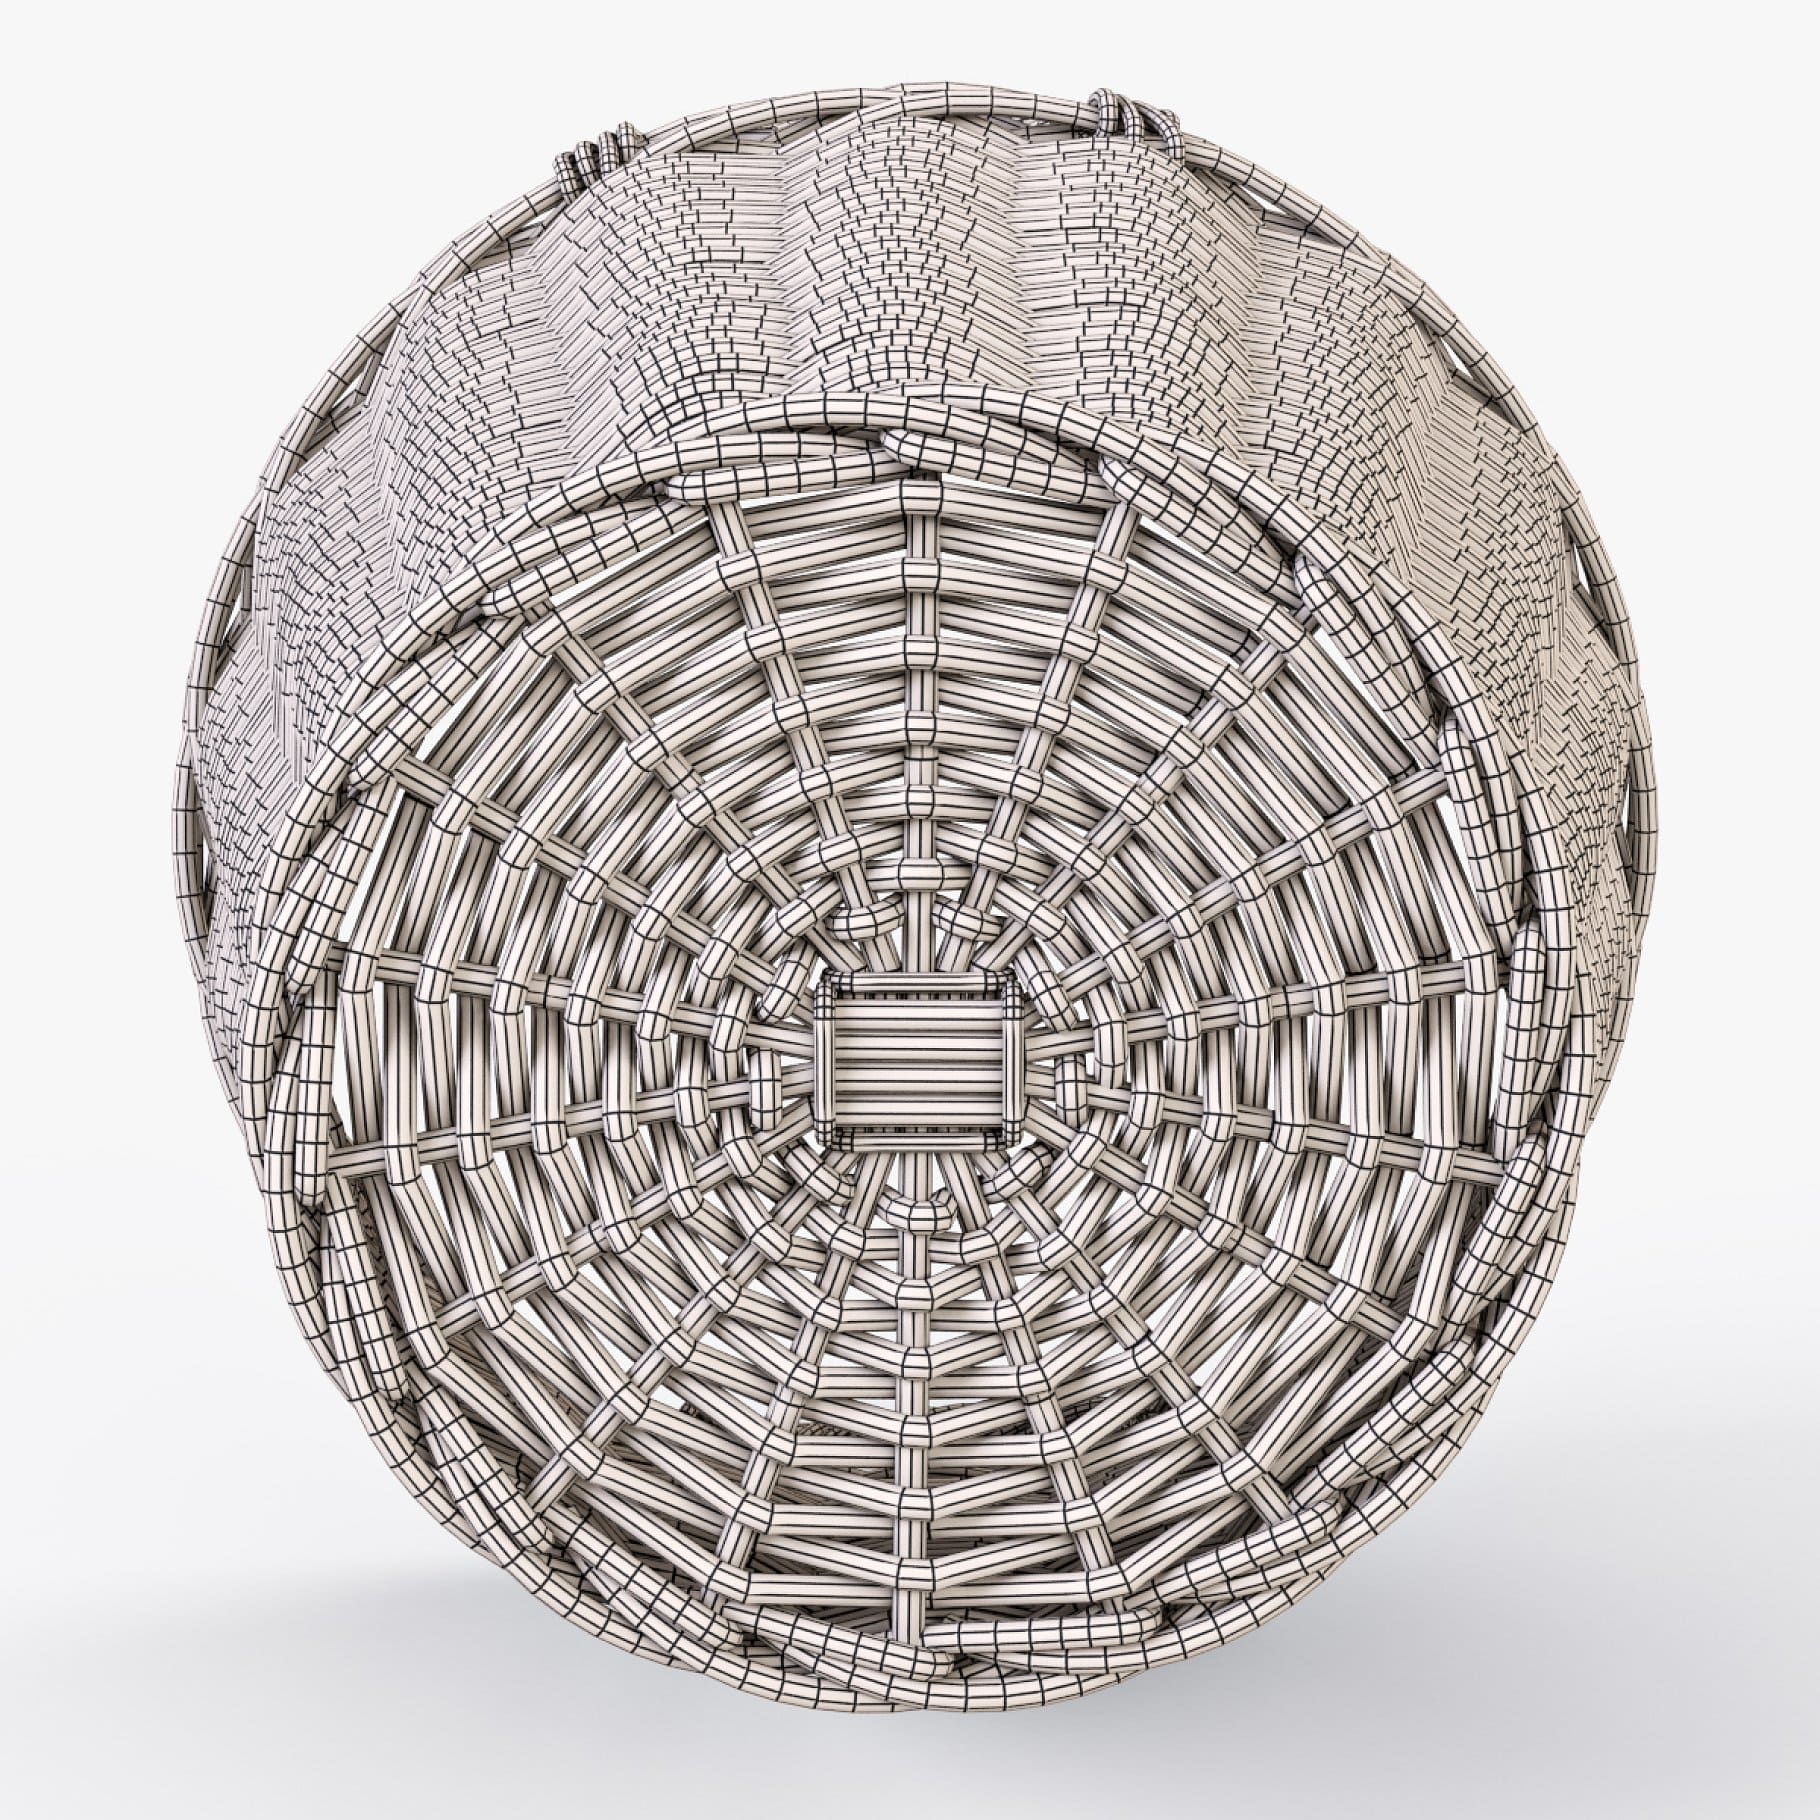 The outer bottom of the basket 3D model.